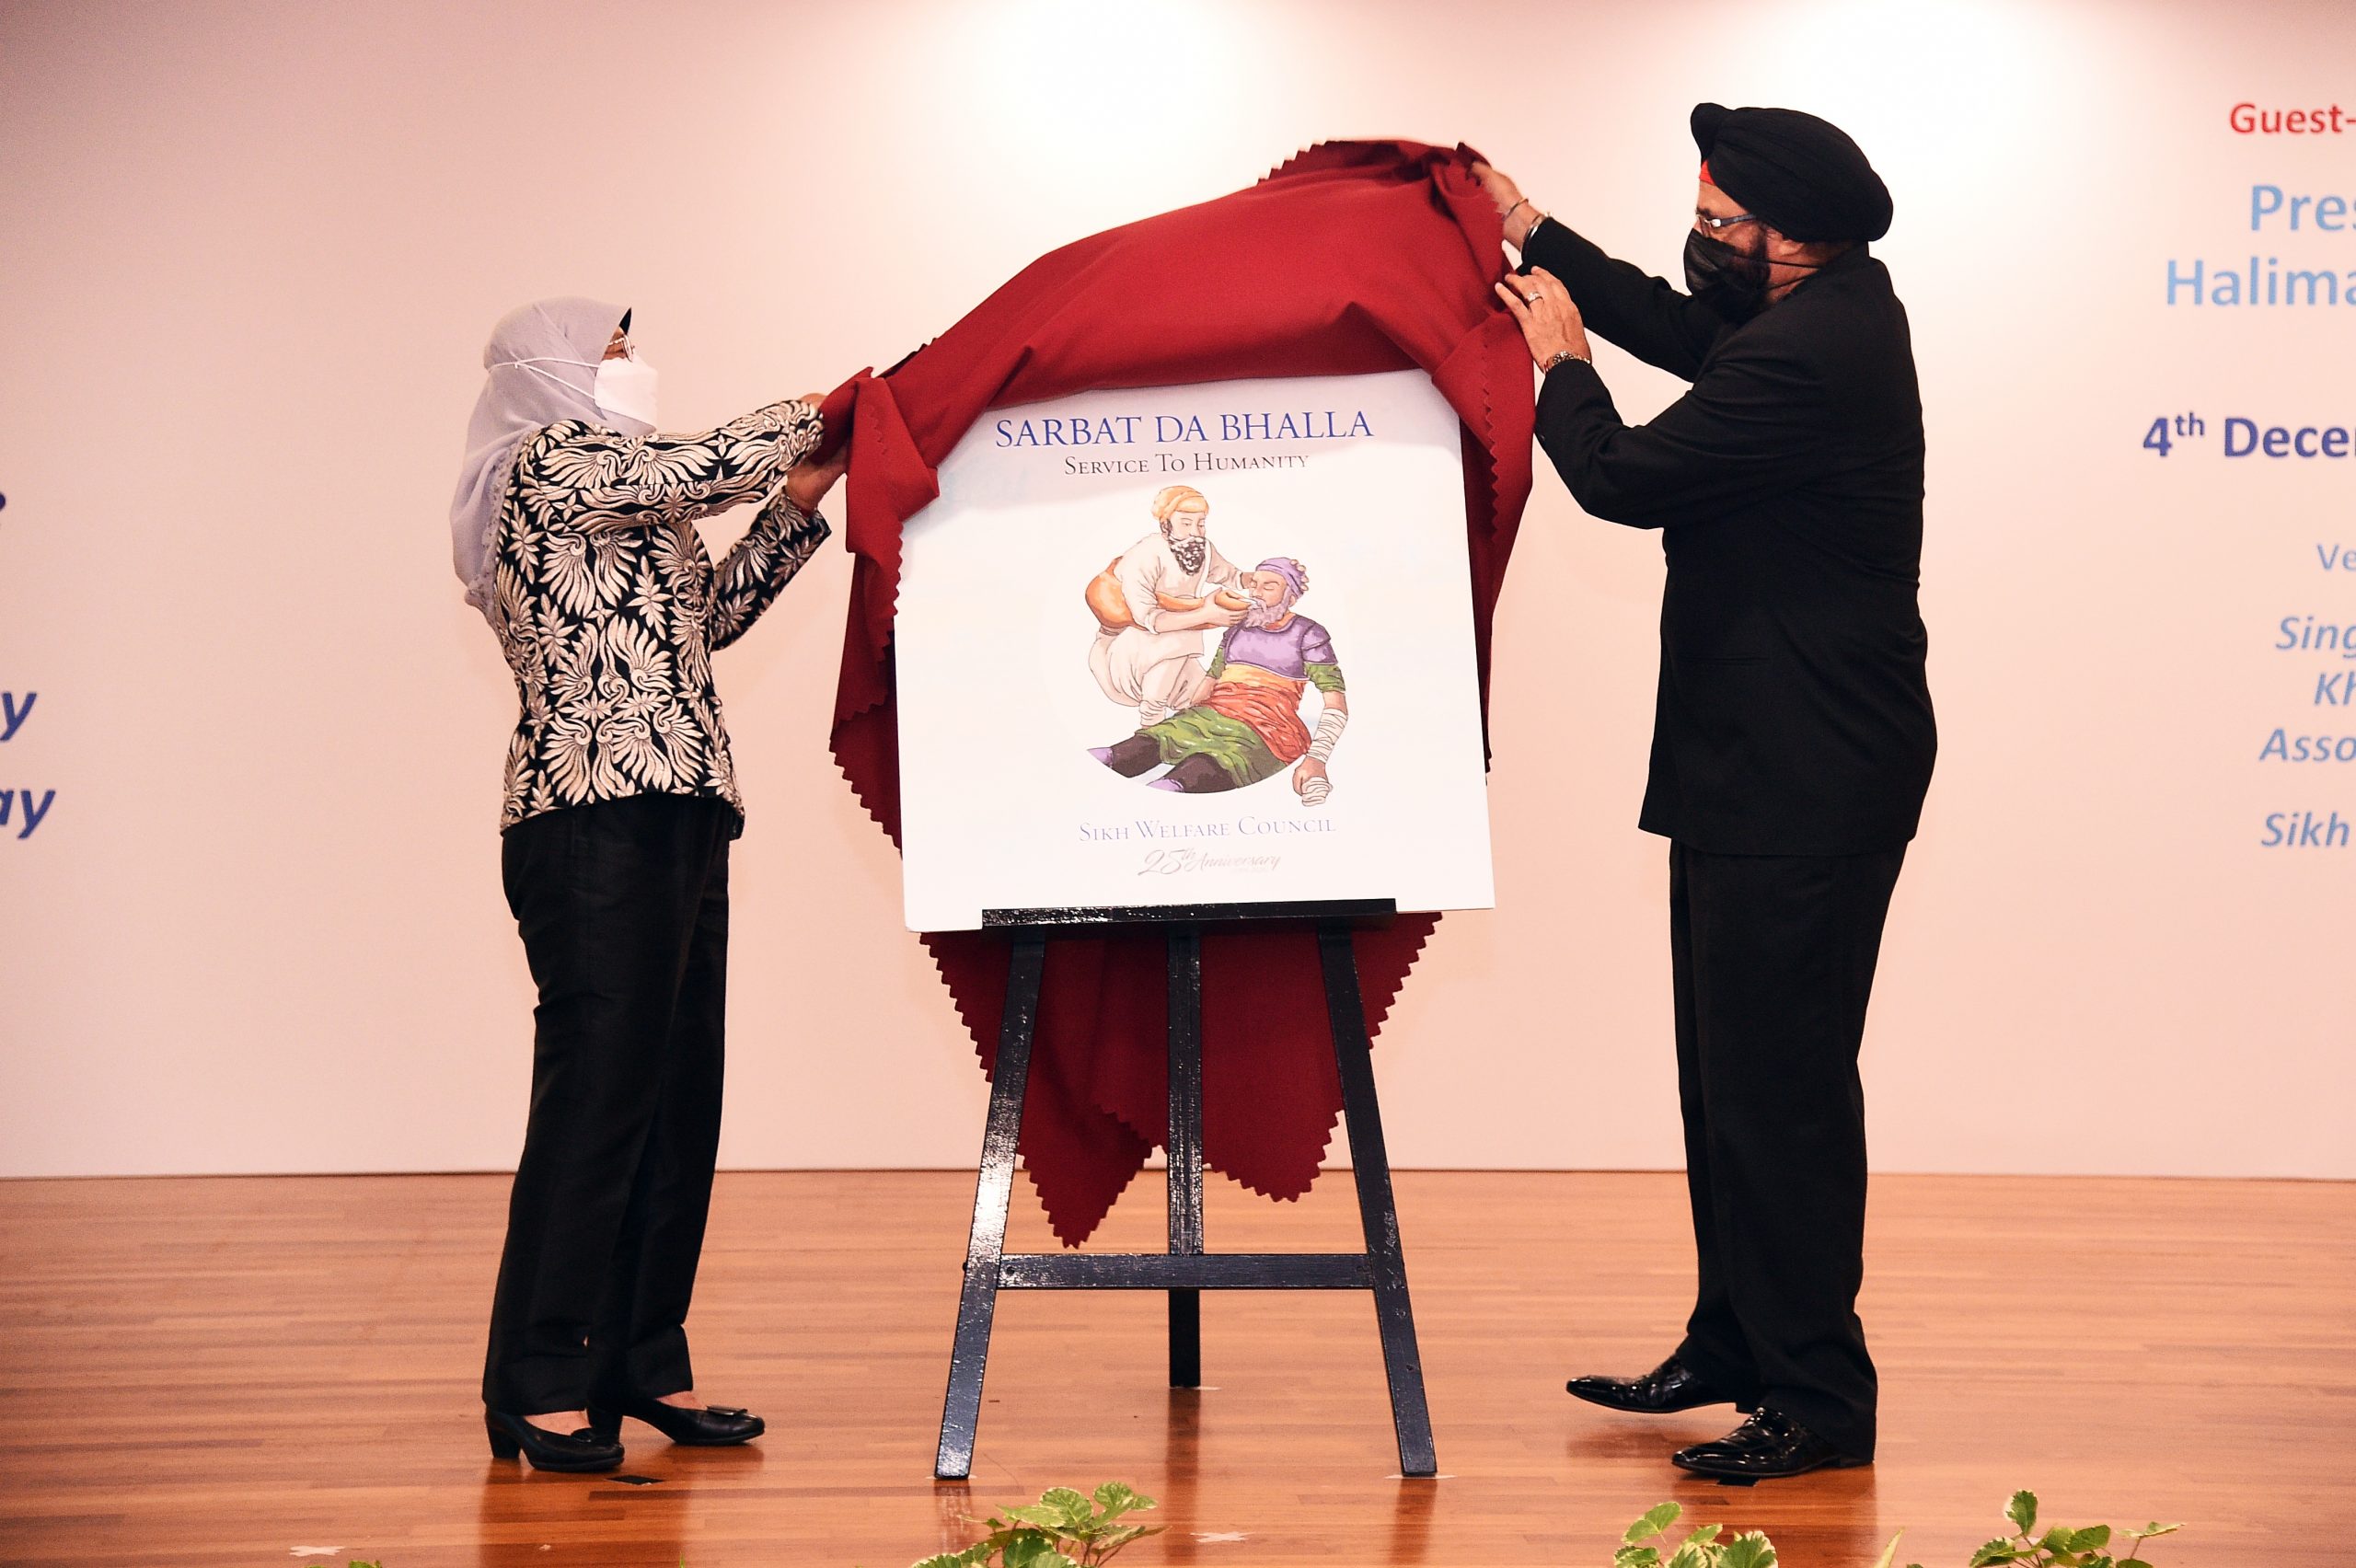 Unveiling of Sarbat De Bhalla, Service to Humanity at Sikh Welfare Council's 25th Anniversary